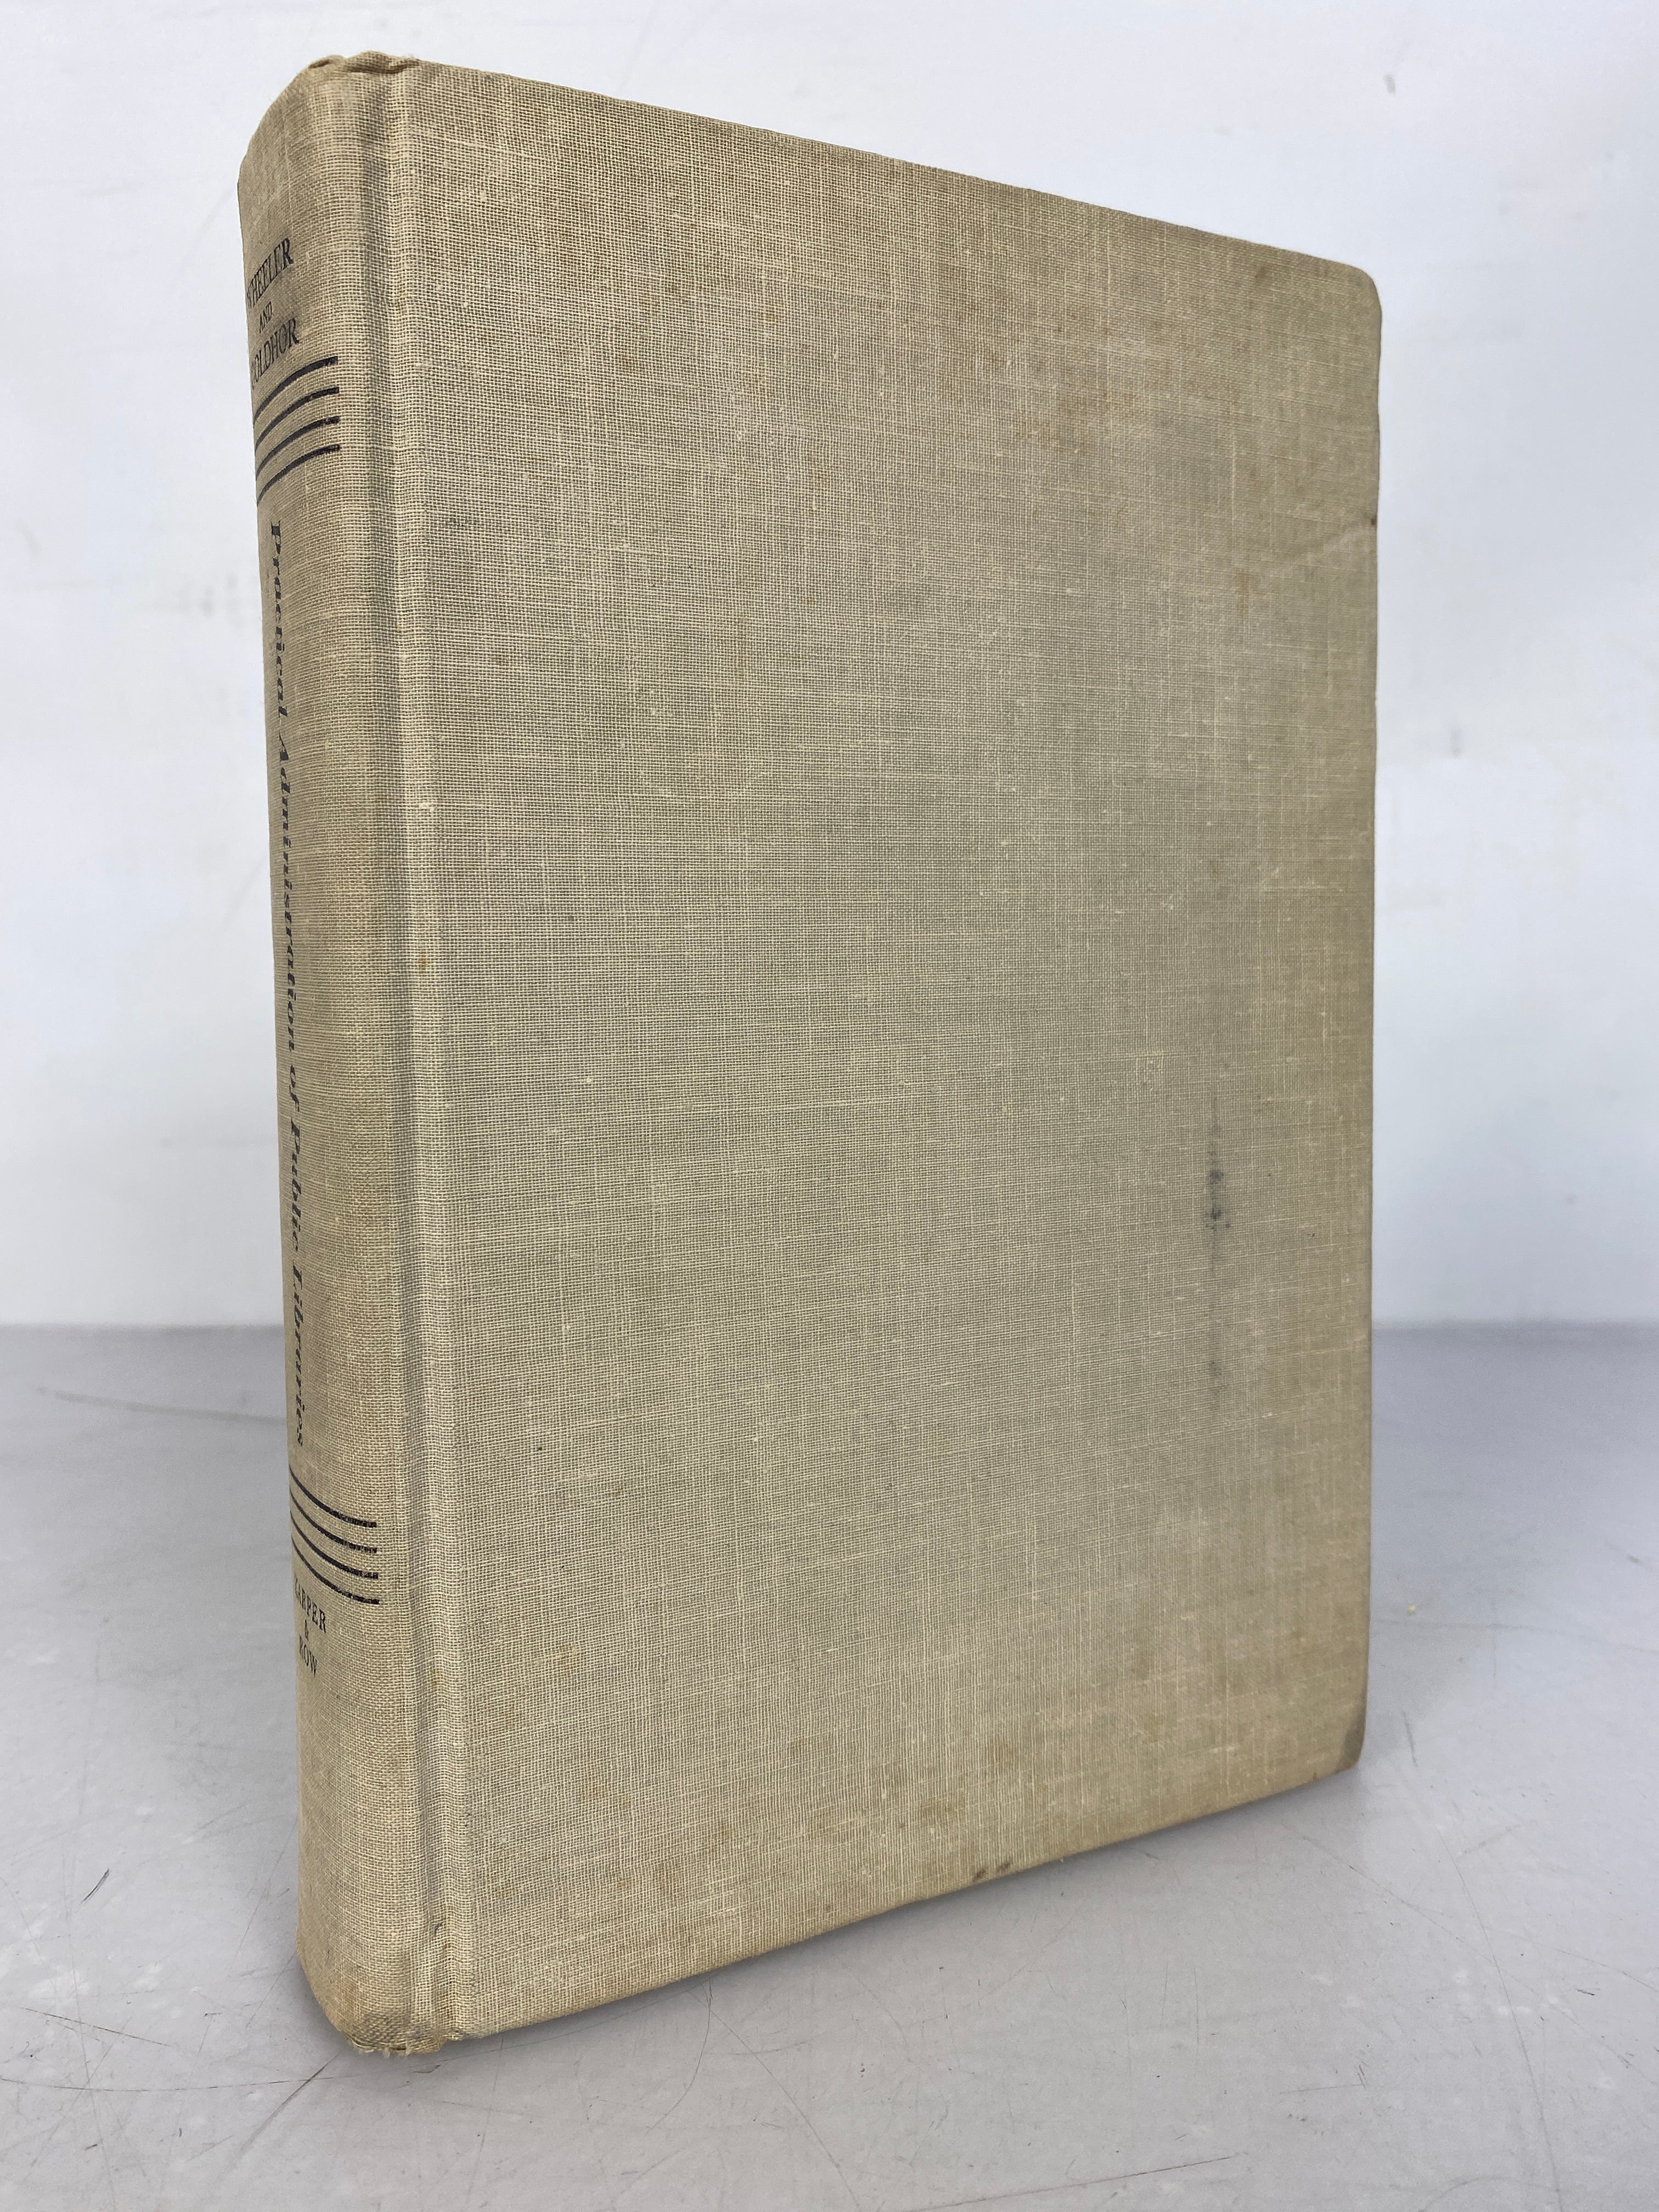 Practical Administration of Public Libraries by Wheeler and Goldhor 1962 HC